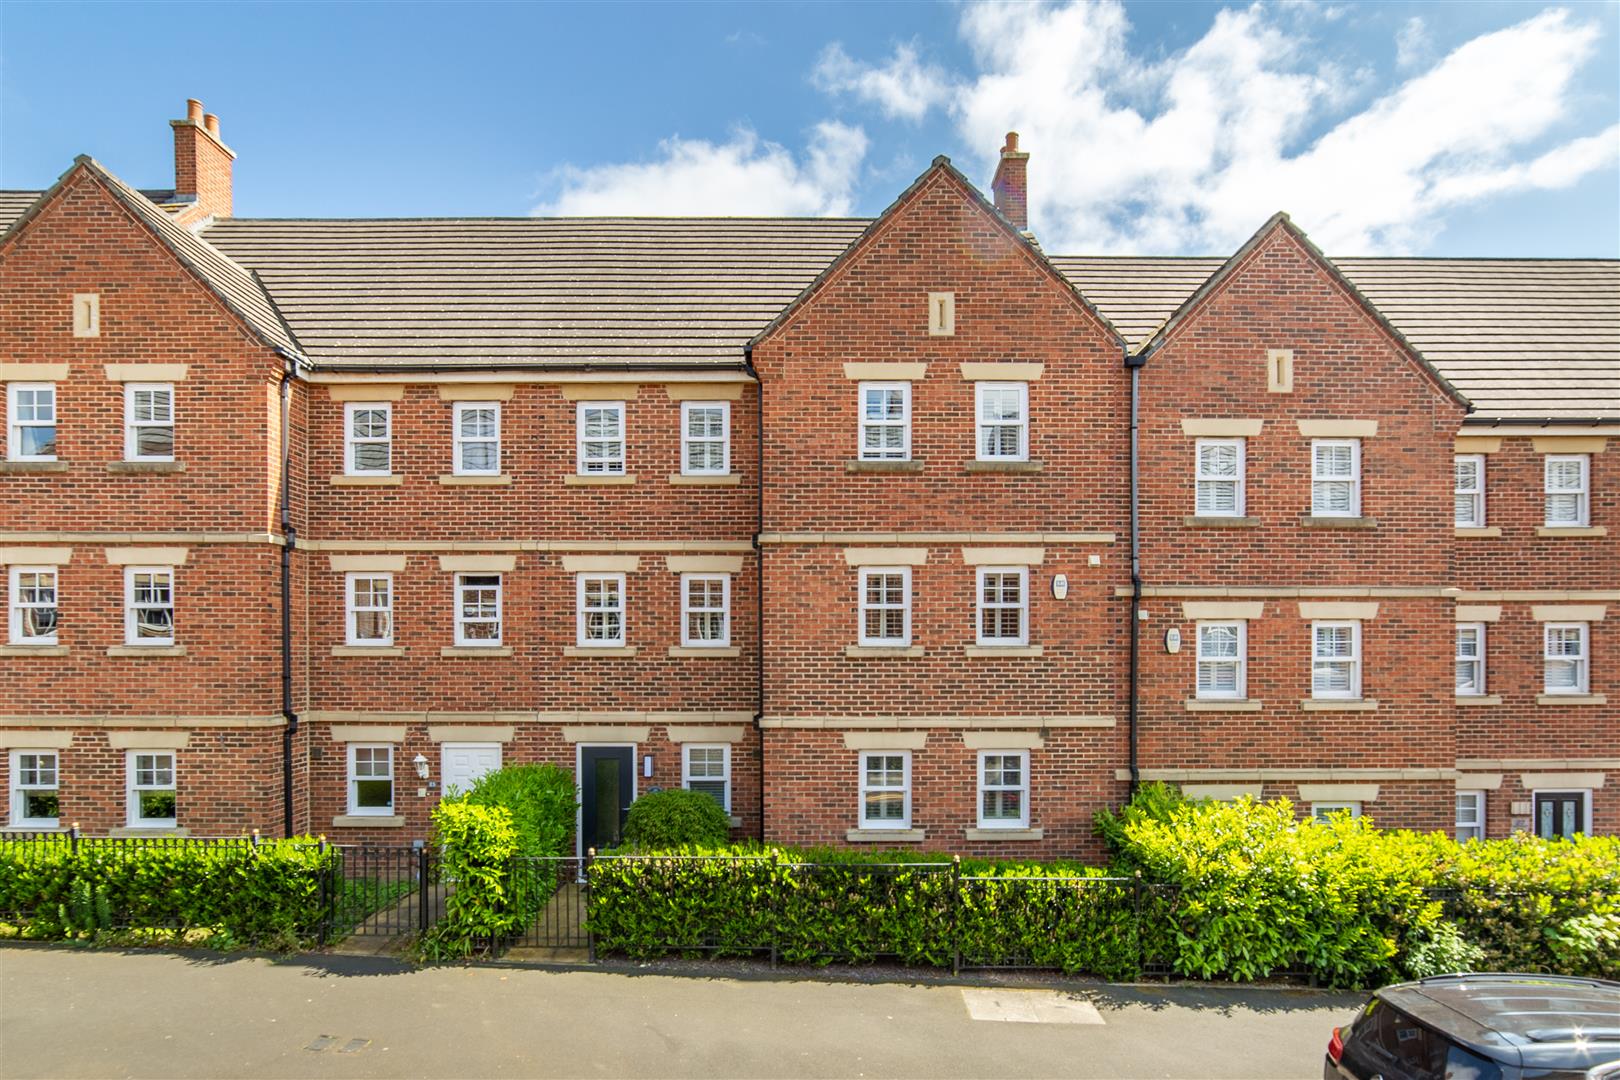 5 bed town house for sale in Featherstone Grove, Great Park, NE3 